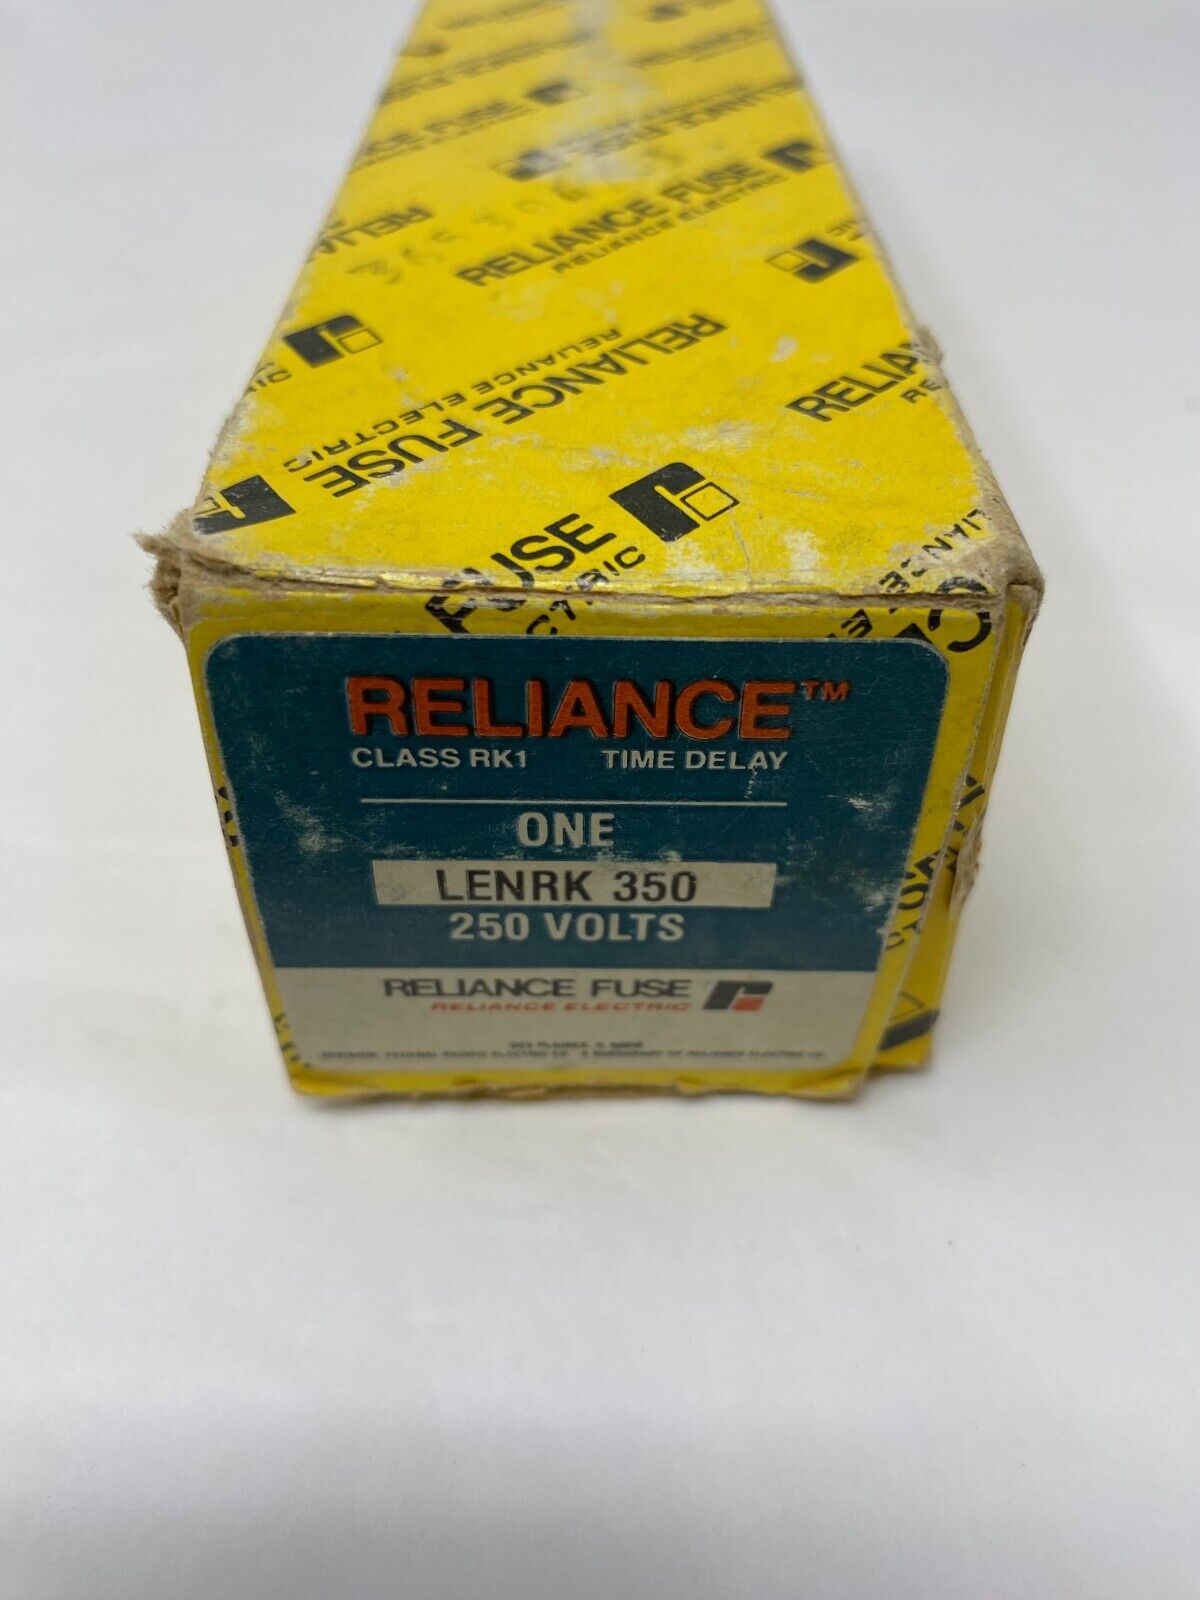 Reliance LENRK 350 350A Time Delay Dual Element Current Limiting Fuse RK1 250V